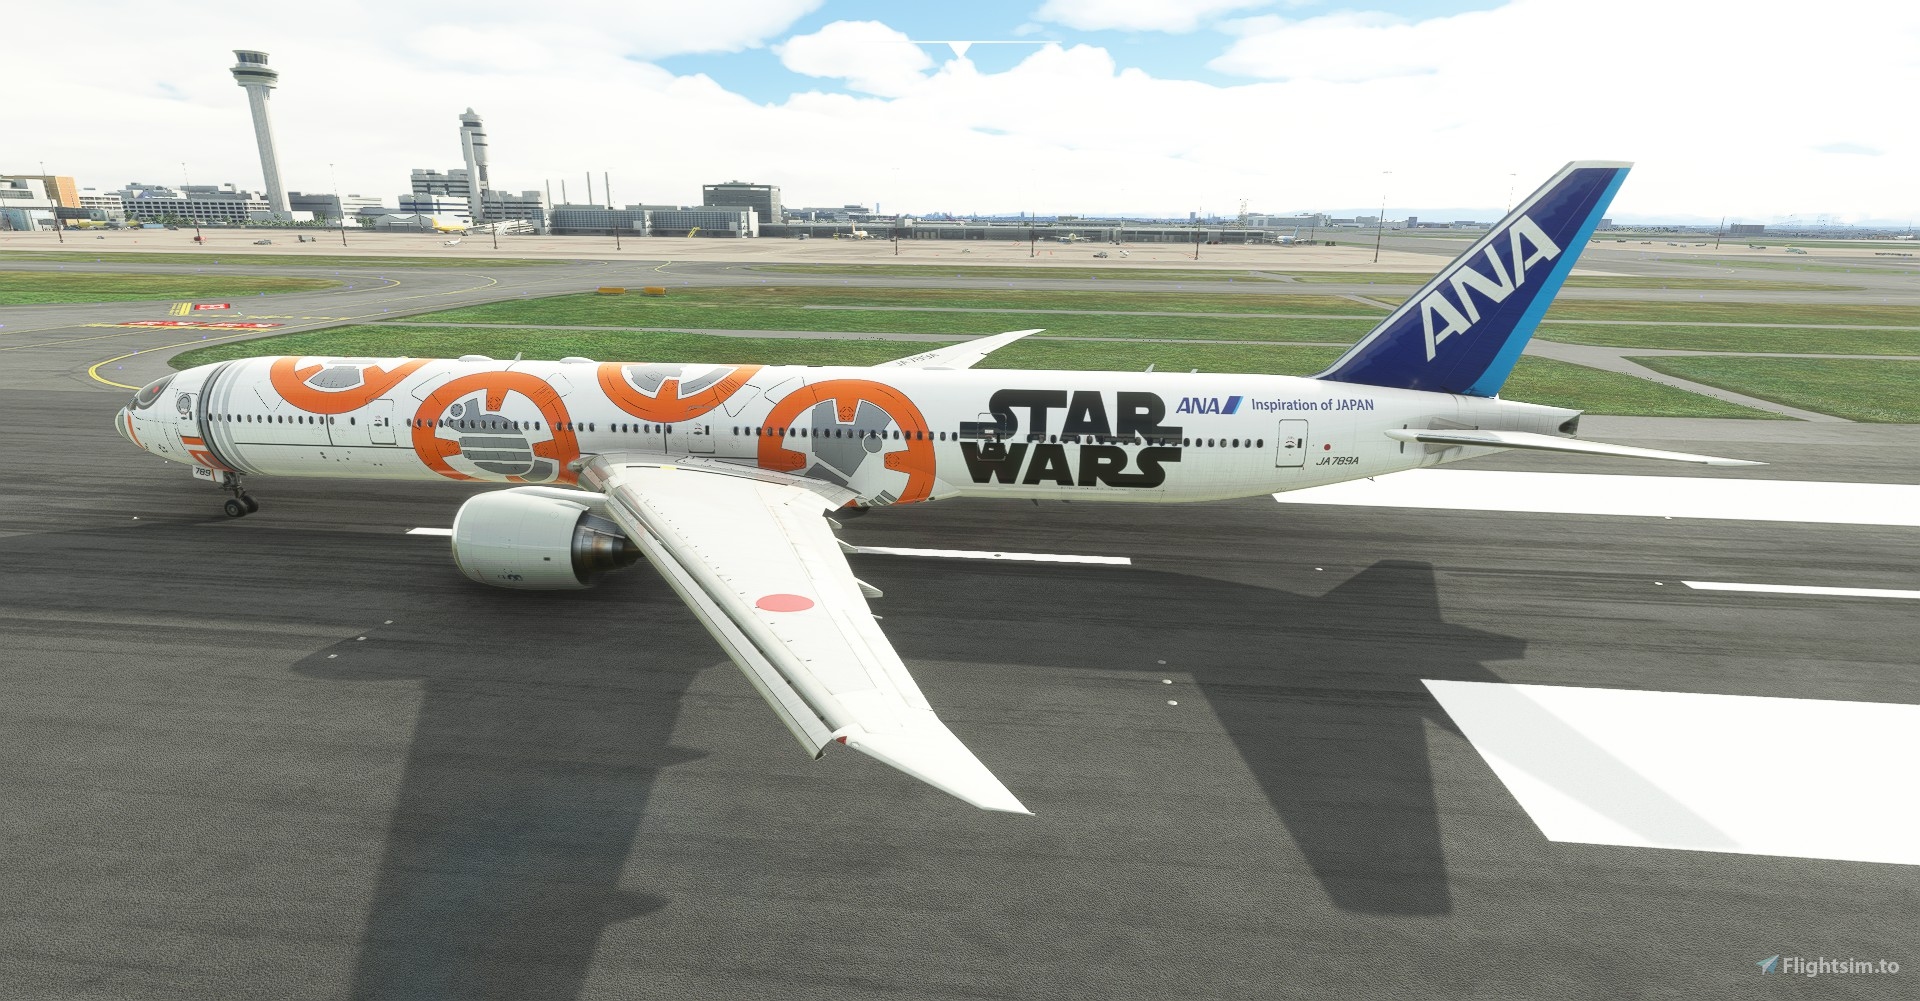 All Nippon Airways / ANA Star Wars BB-8 CaptainSim 777-300ER for 